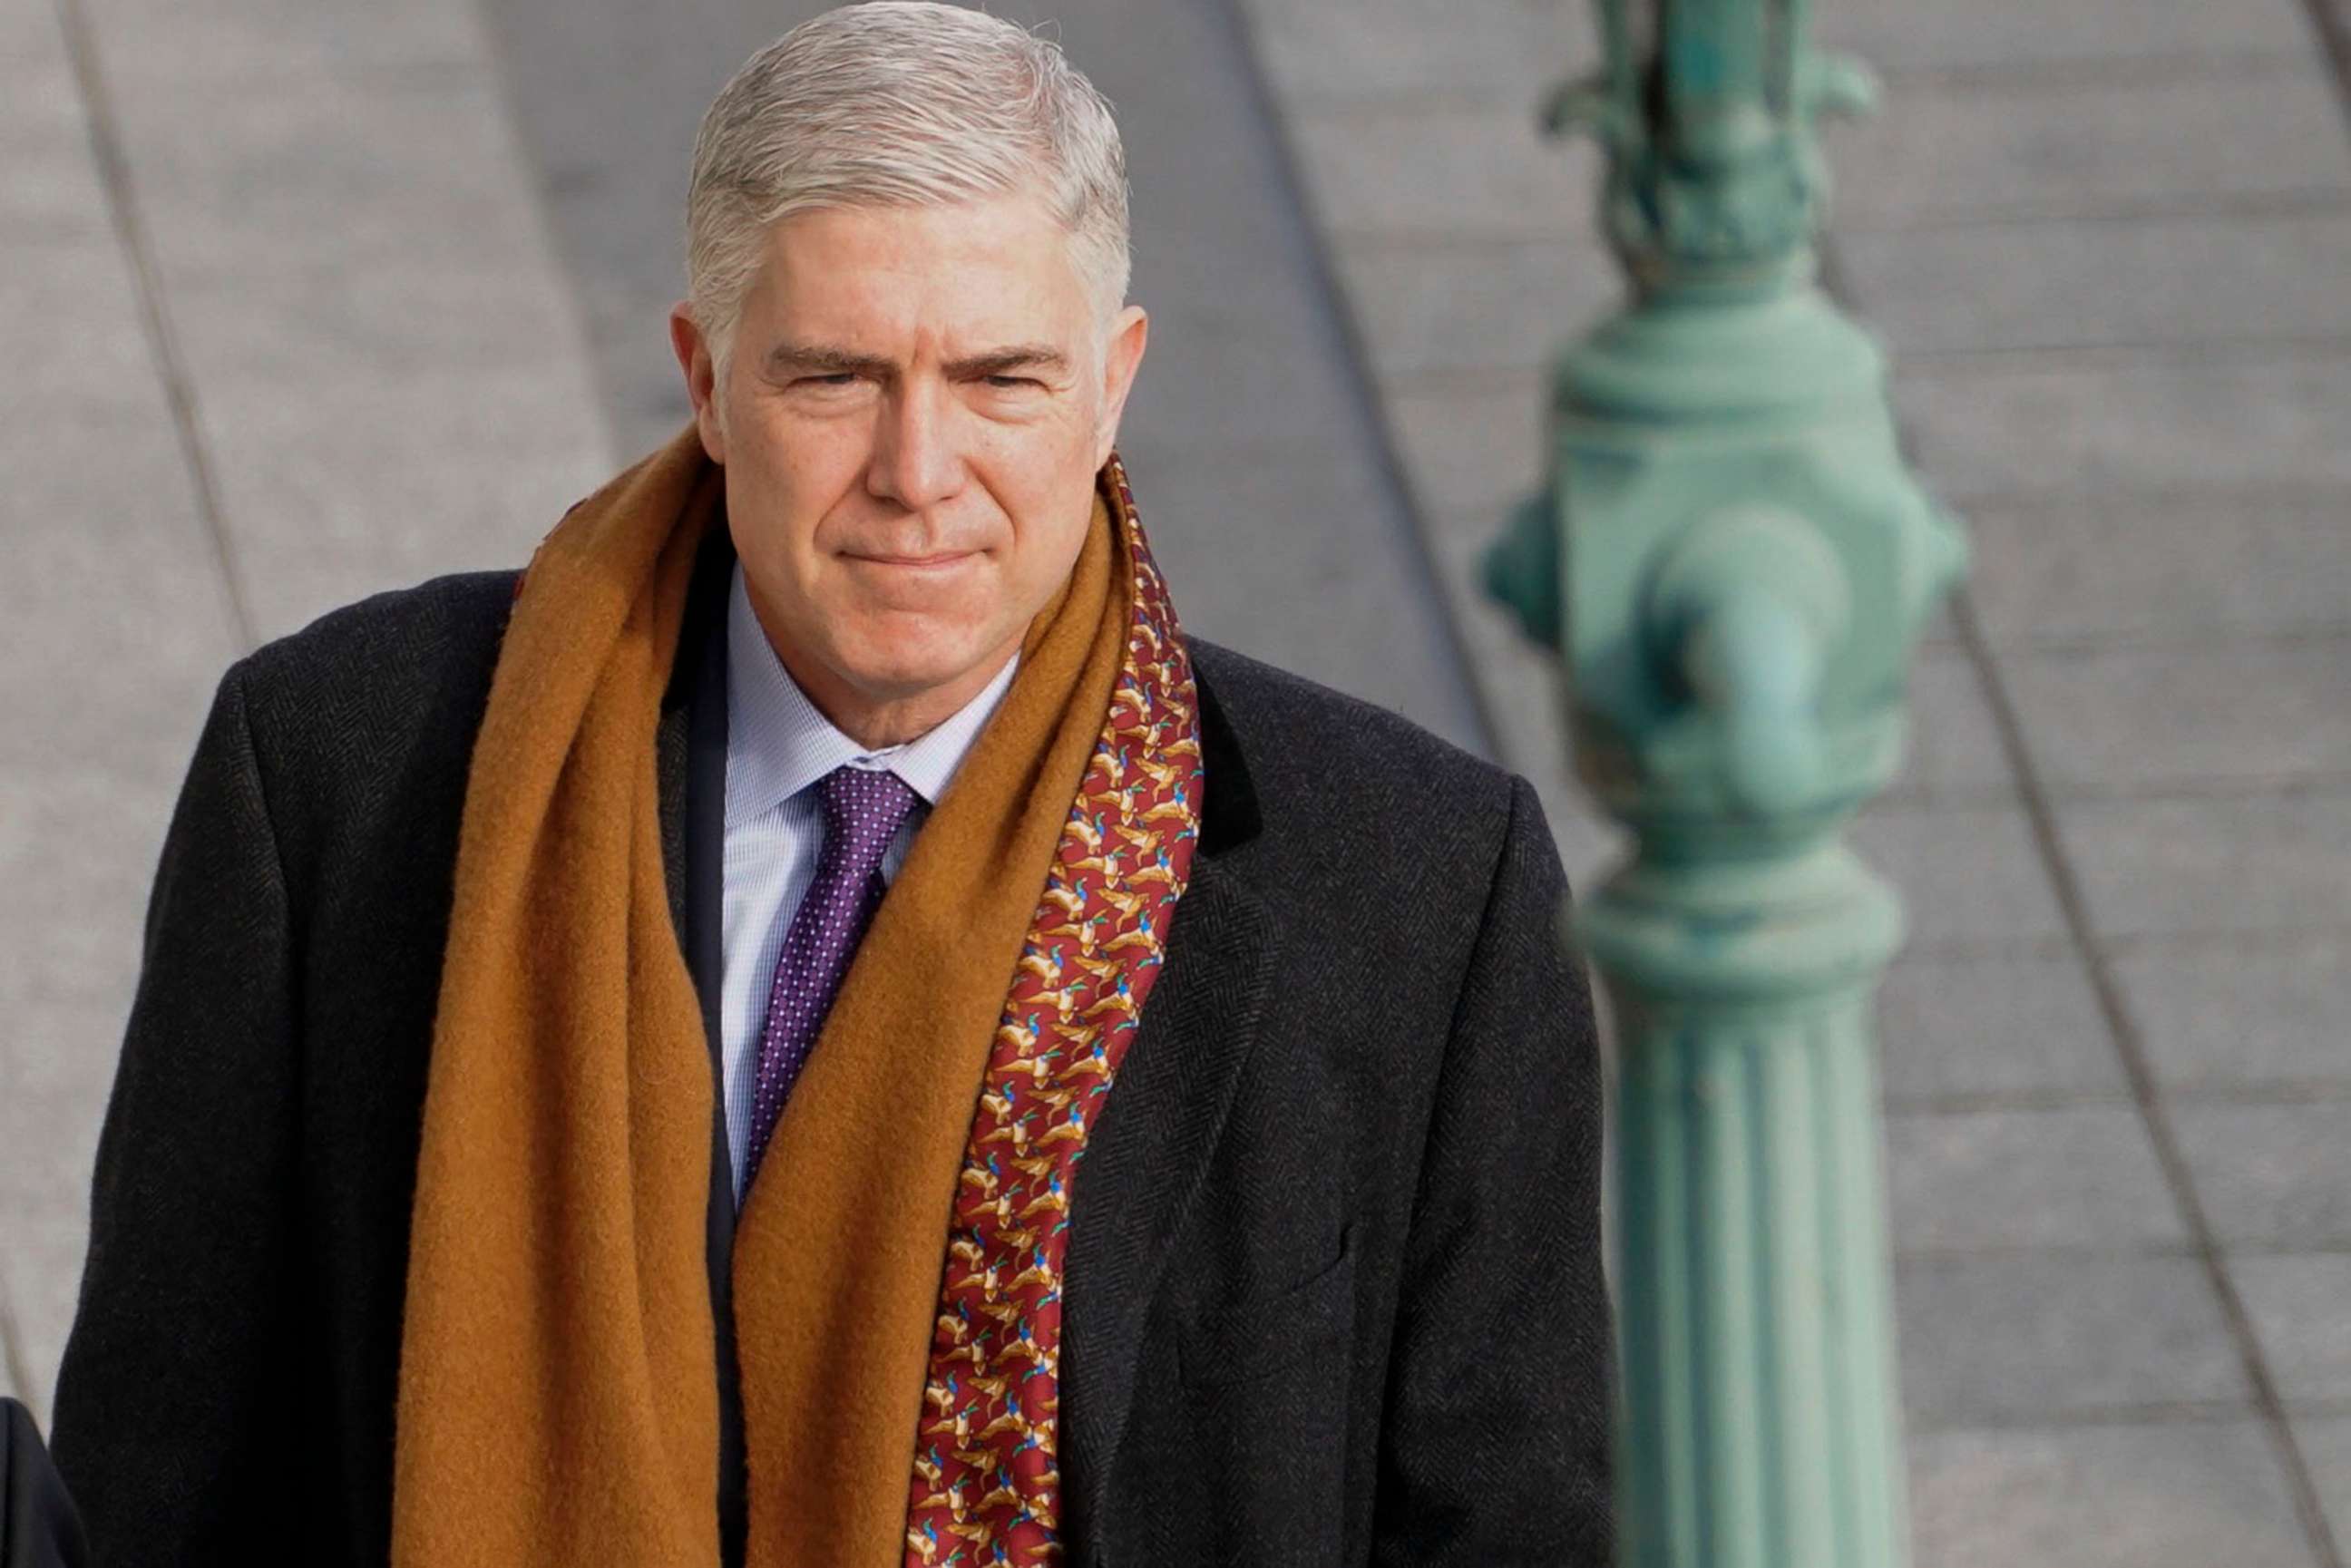 PHOTO: Justice Neil M. Gorsuch arrives at the U.S. Capitol ahead of the inauguration of President Joe Biden in Washington, Jan. 20, 2021.